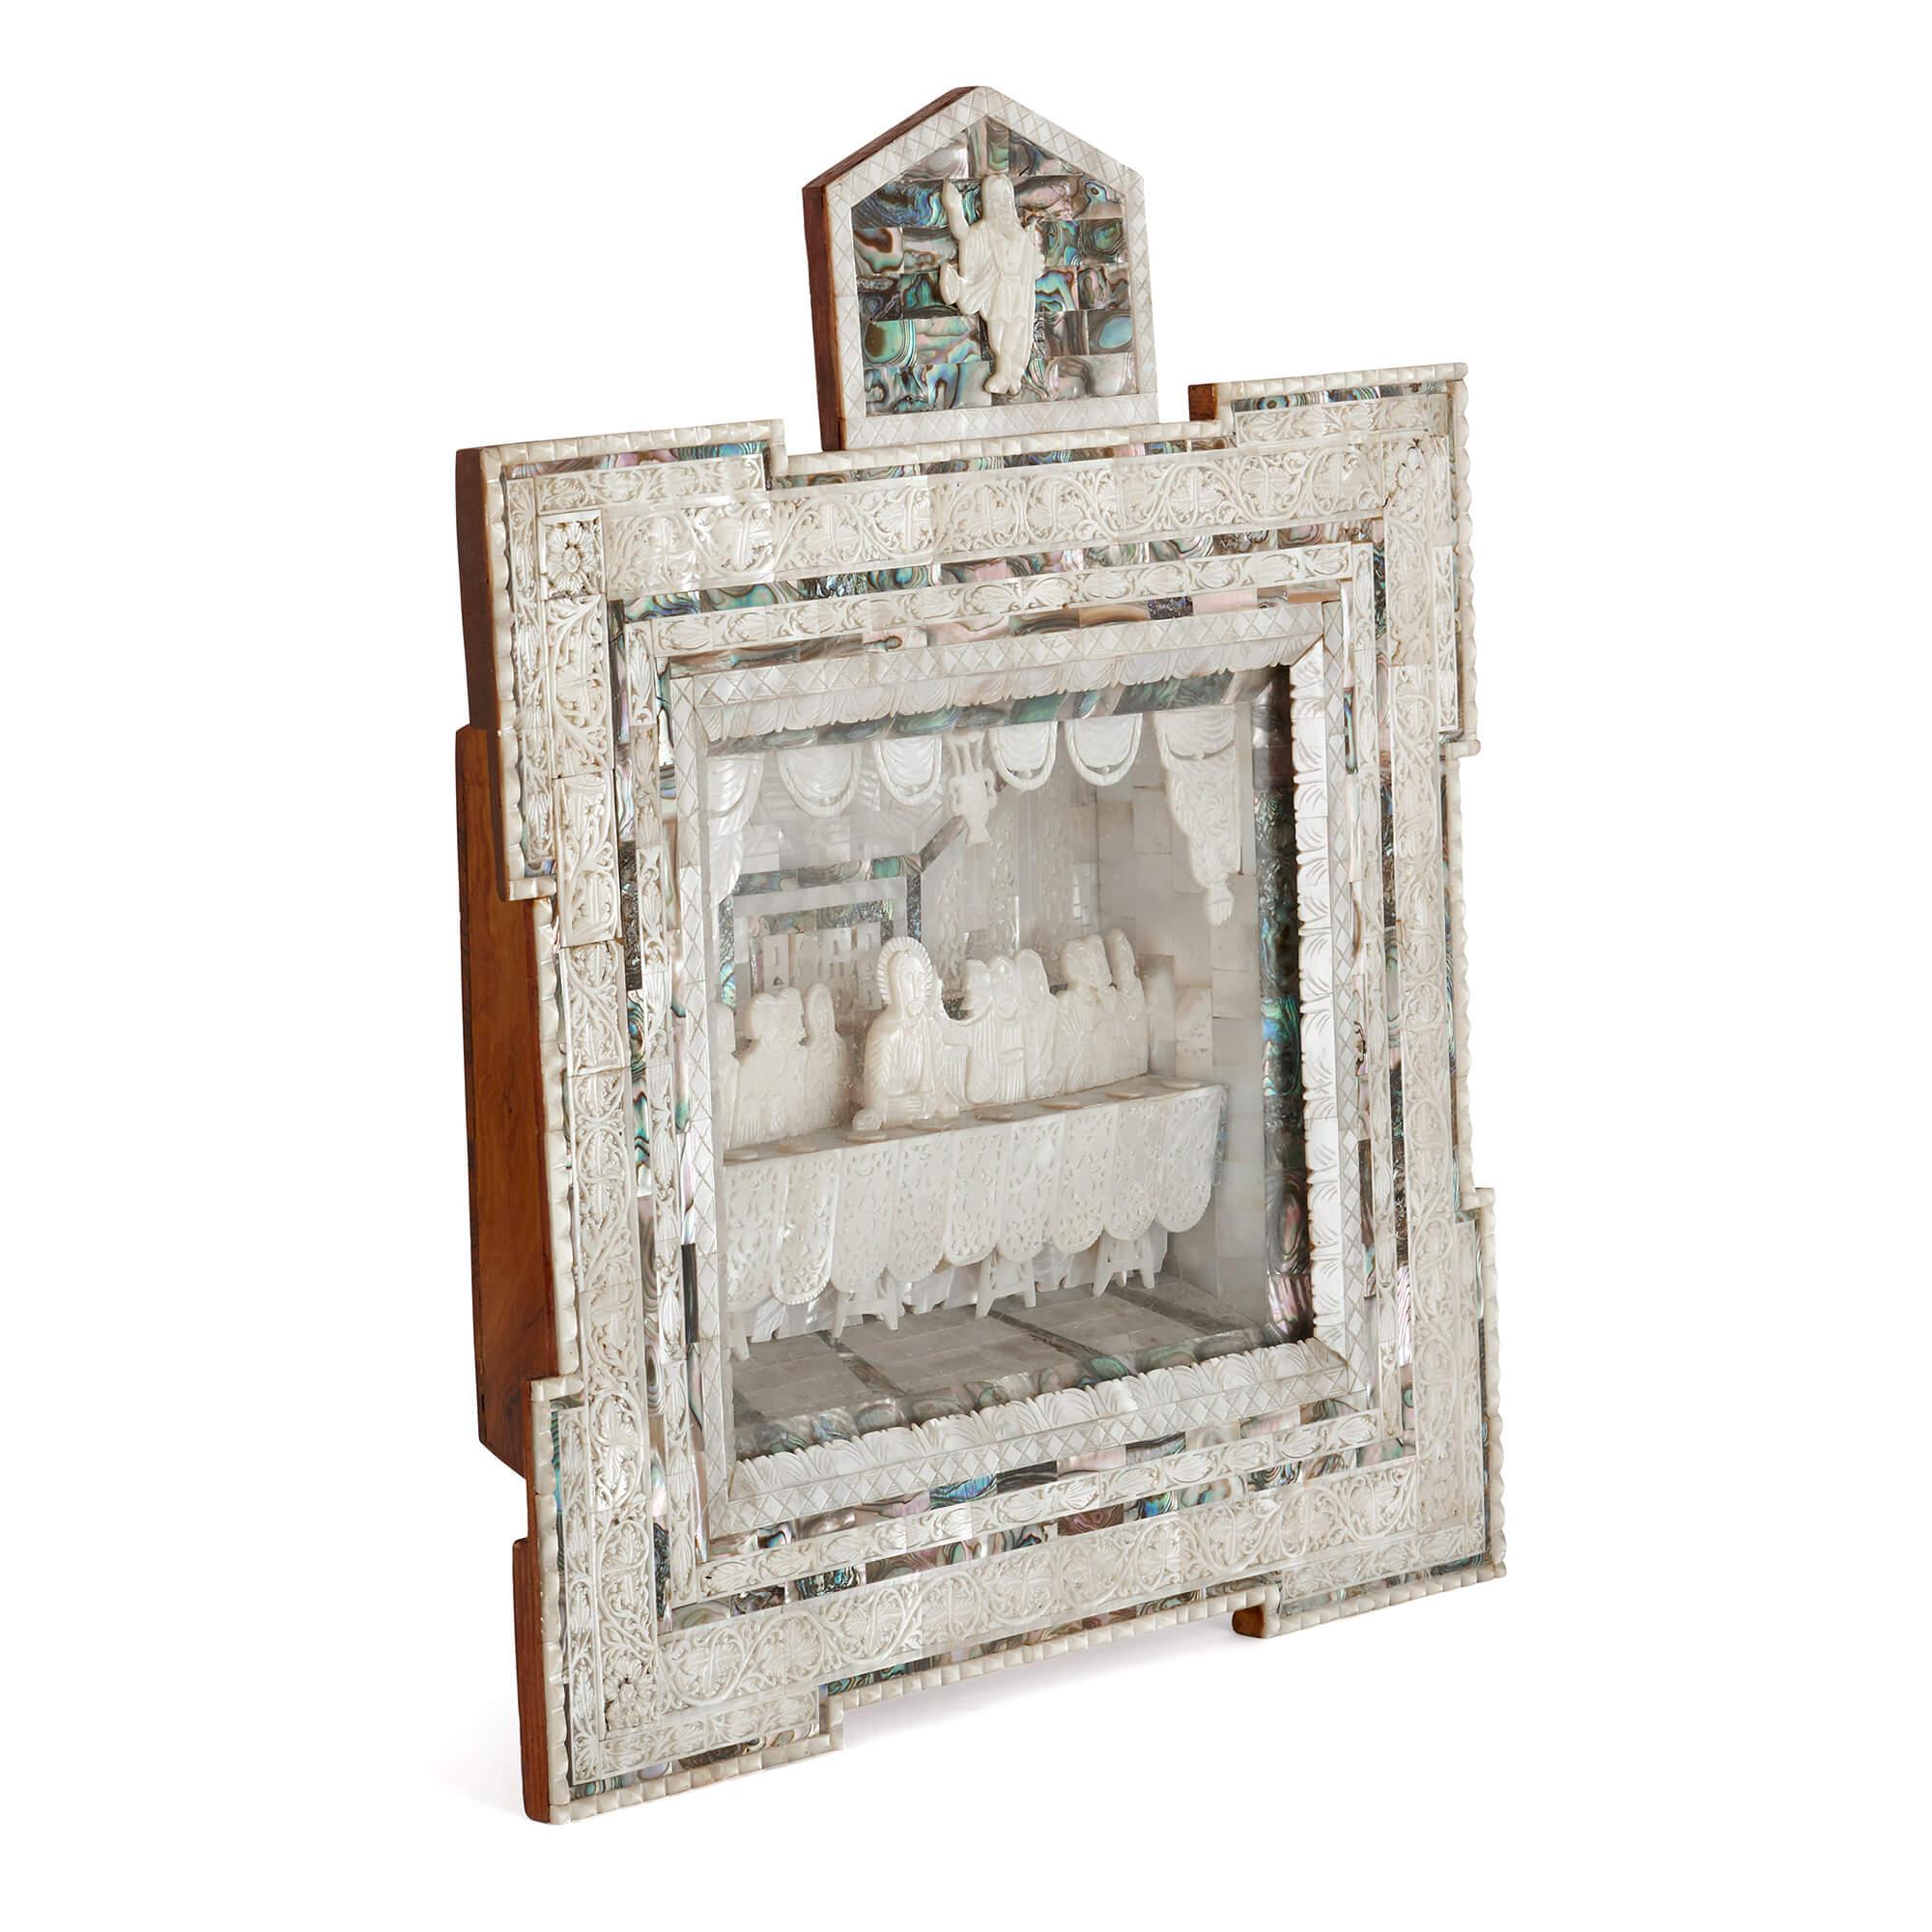 This fantastic mother-of-pearl icon was made in Jerusalem at the end of the 19th century, and is beautifully carved with mother-of-pearl and set with abalone. The central scene shows the Last Supper of Christ, with Jesus shown at the centre of a